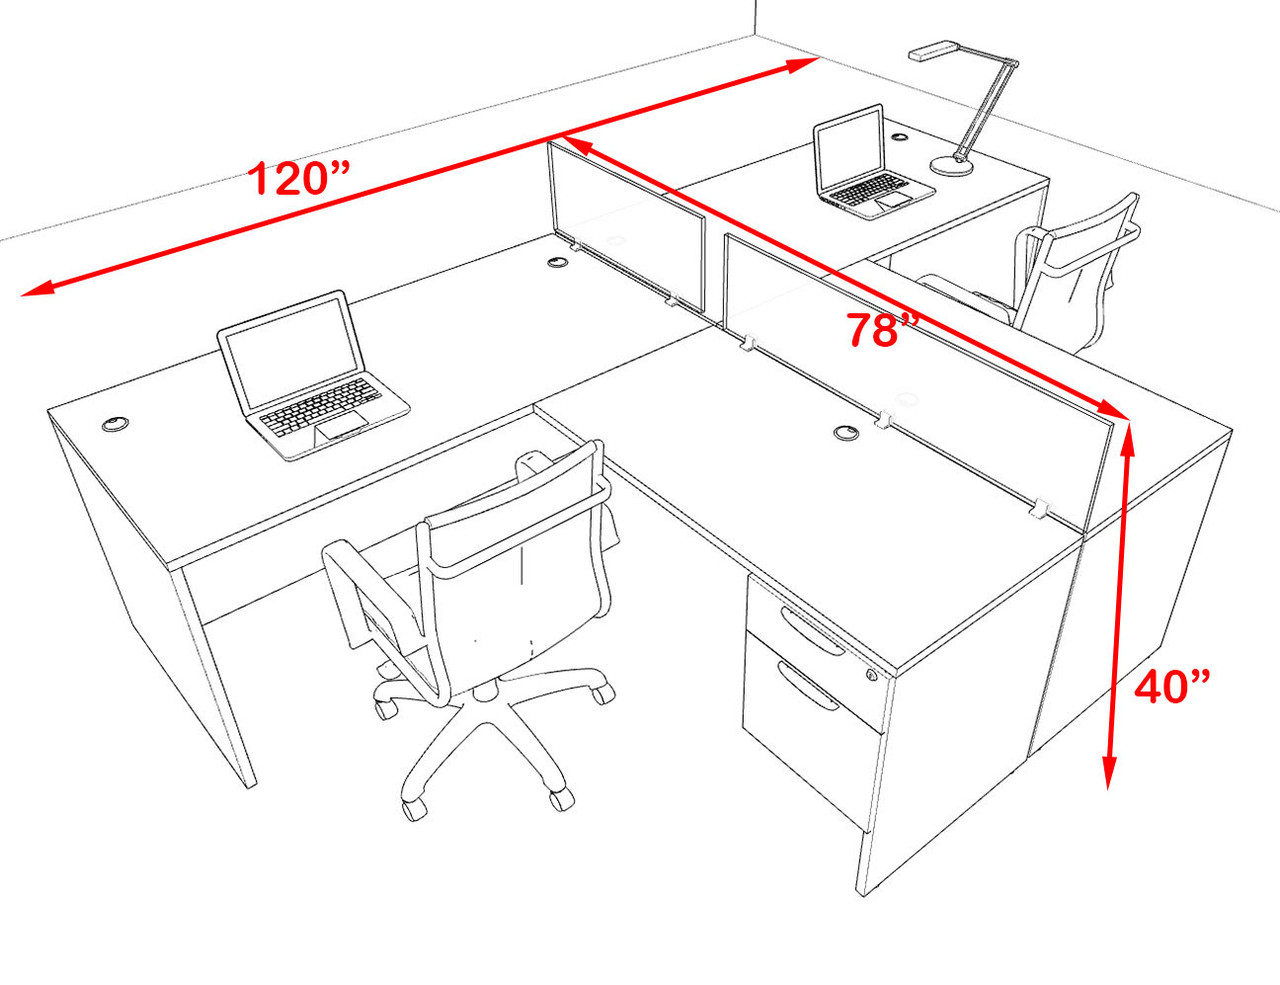 Two Person Modern Acrylic Divider Office Workstation Desk Set, #OF-CPN-SPB53